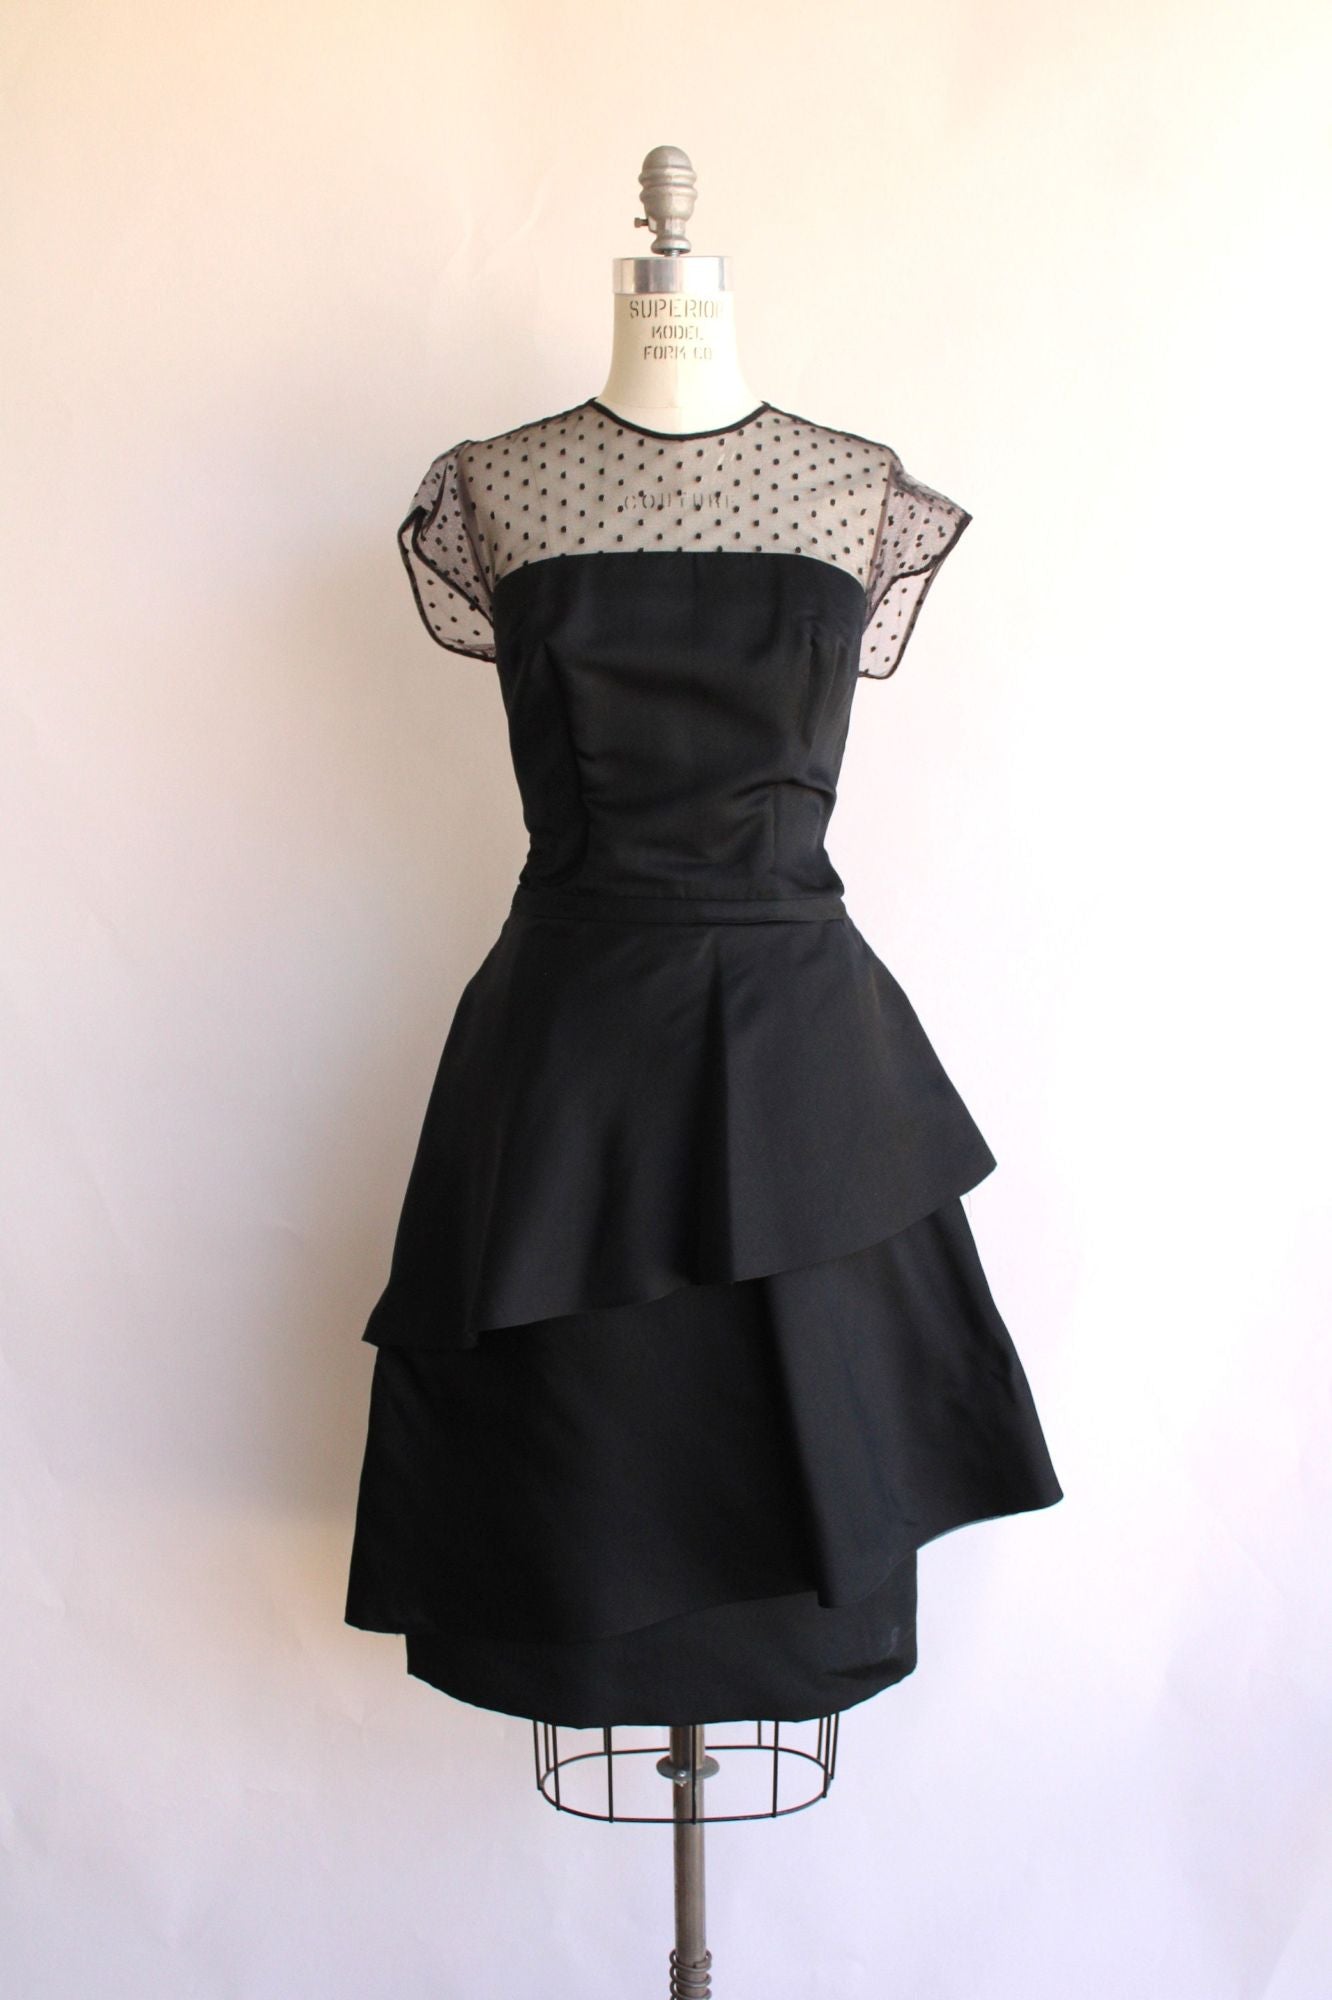 Vintage 1950s 1960s Black Cocktail Dress With Swiss Dot Illusion Lace Neckline and Tiered Skirt